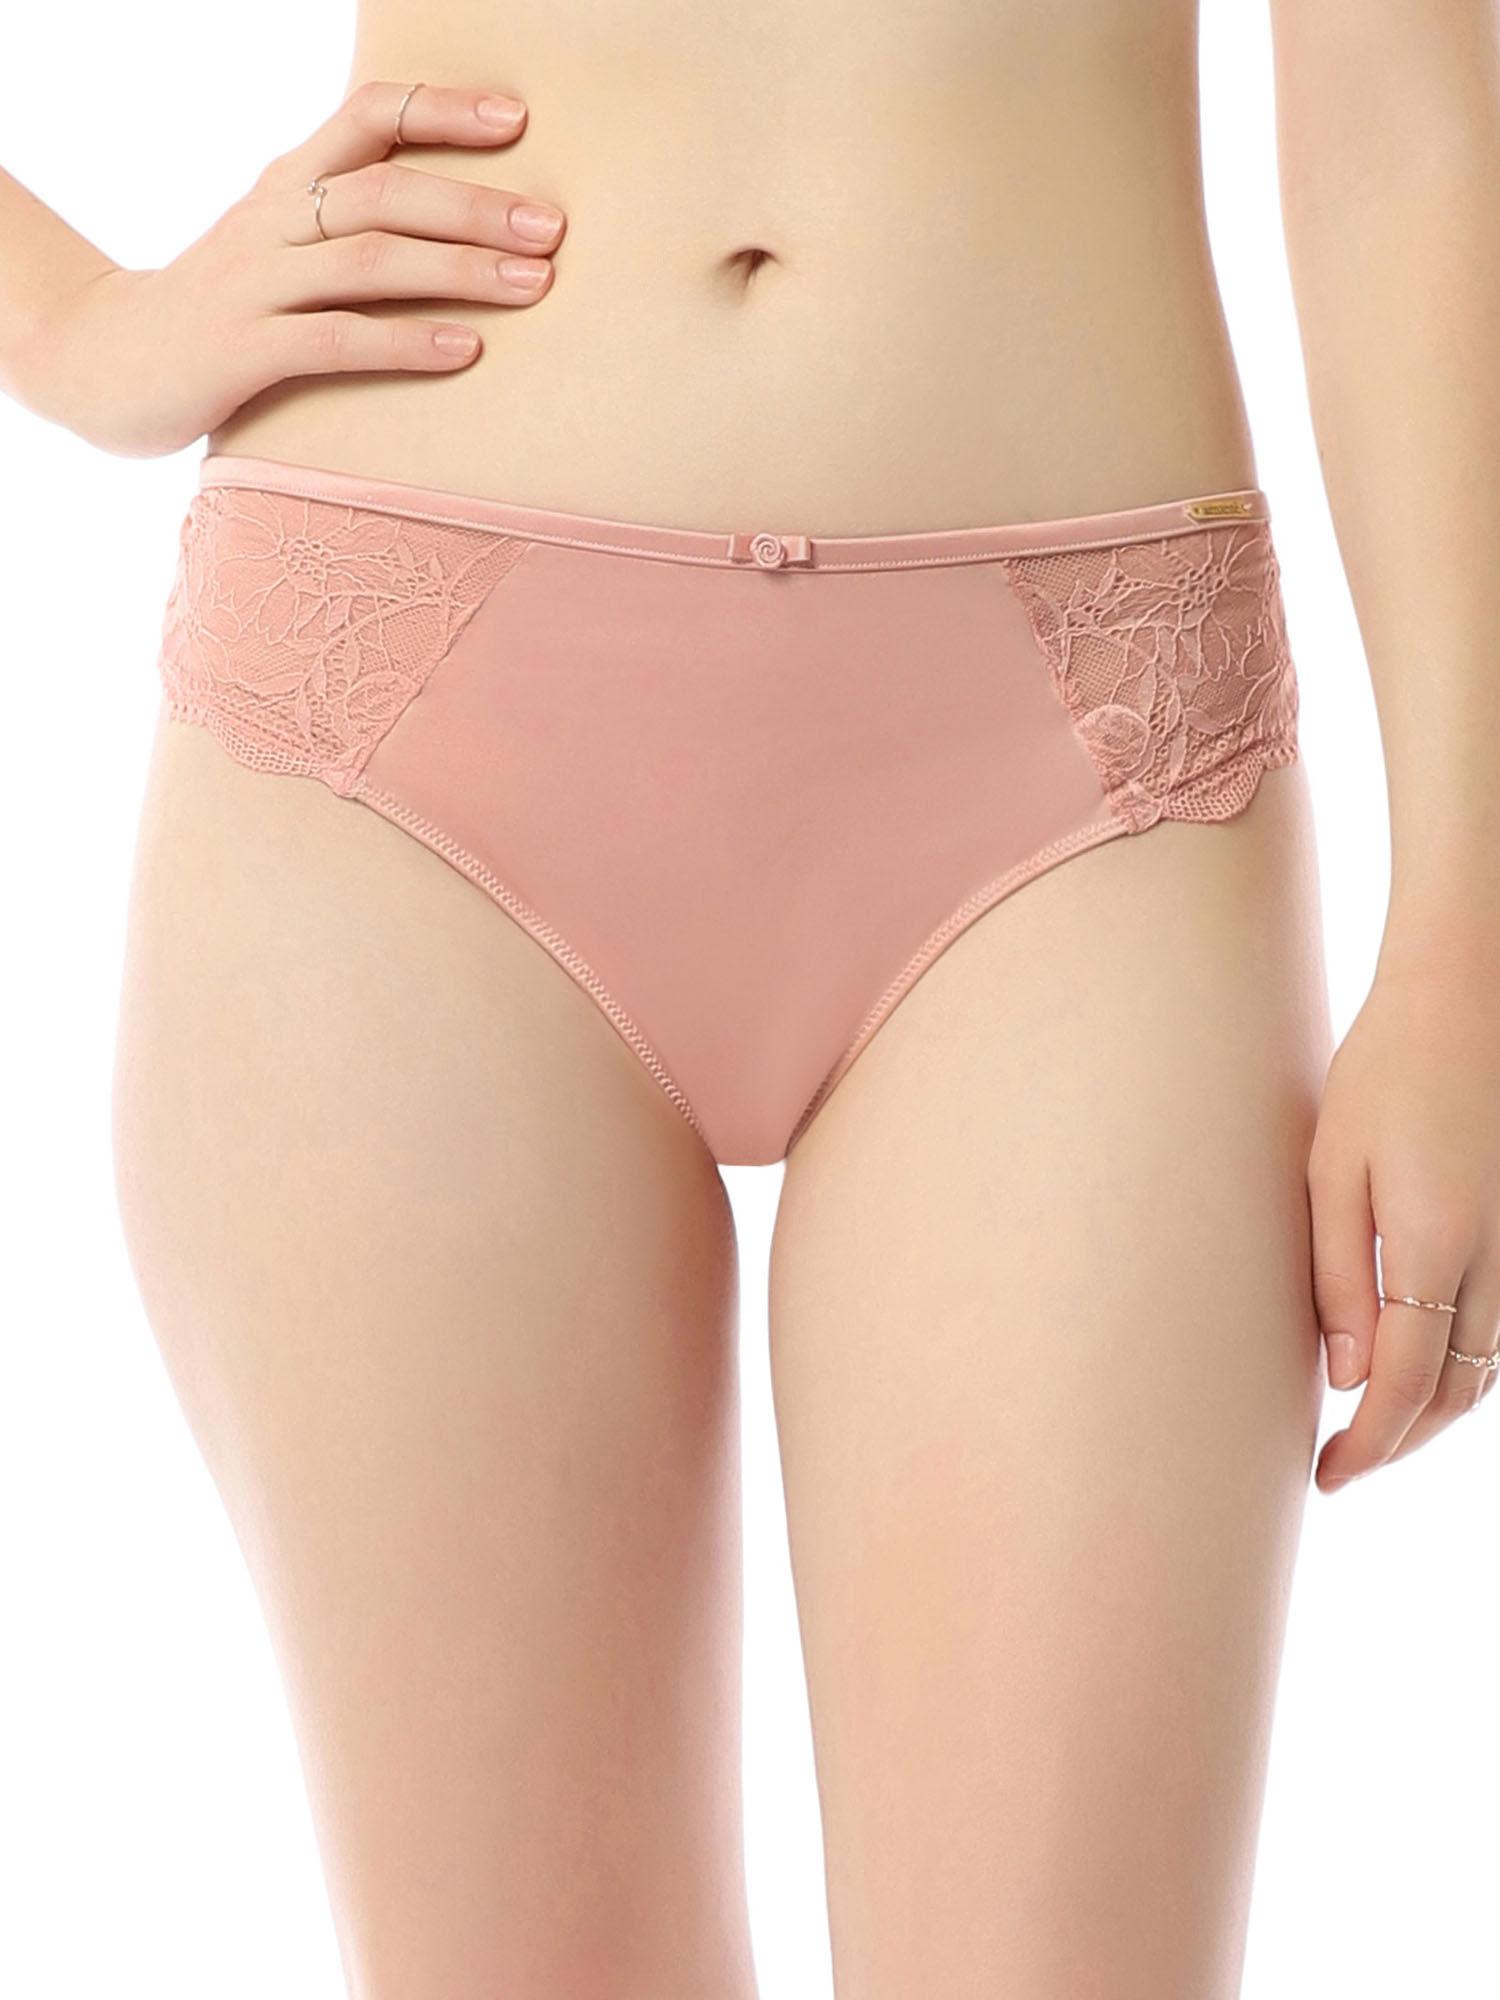 lace three-fourth coverage low rise eternal bliss brazilian panty